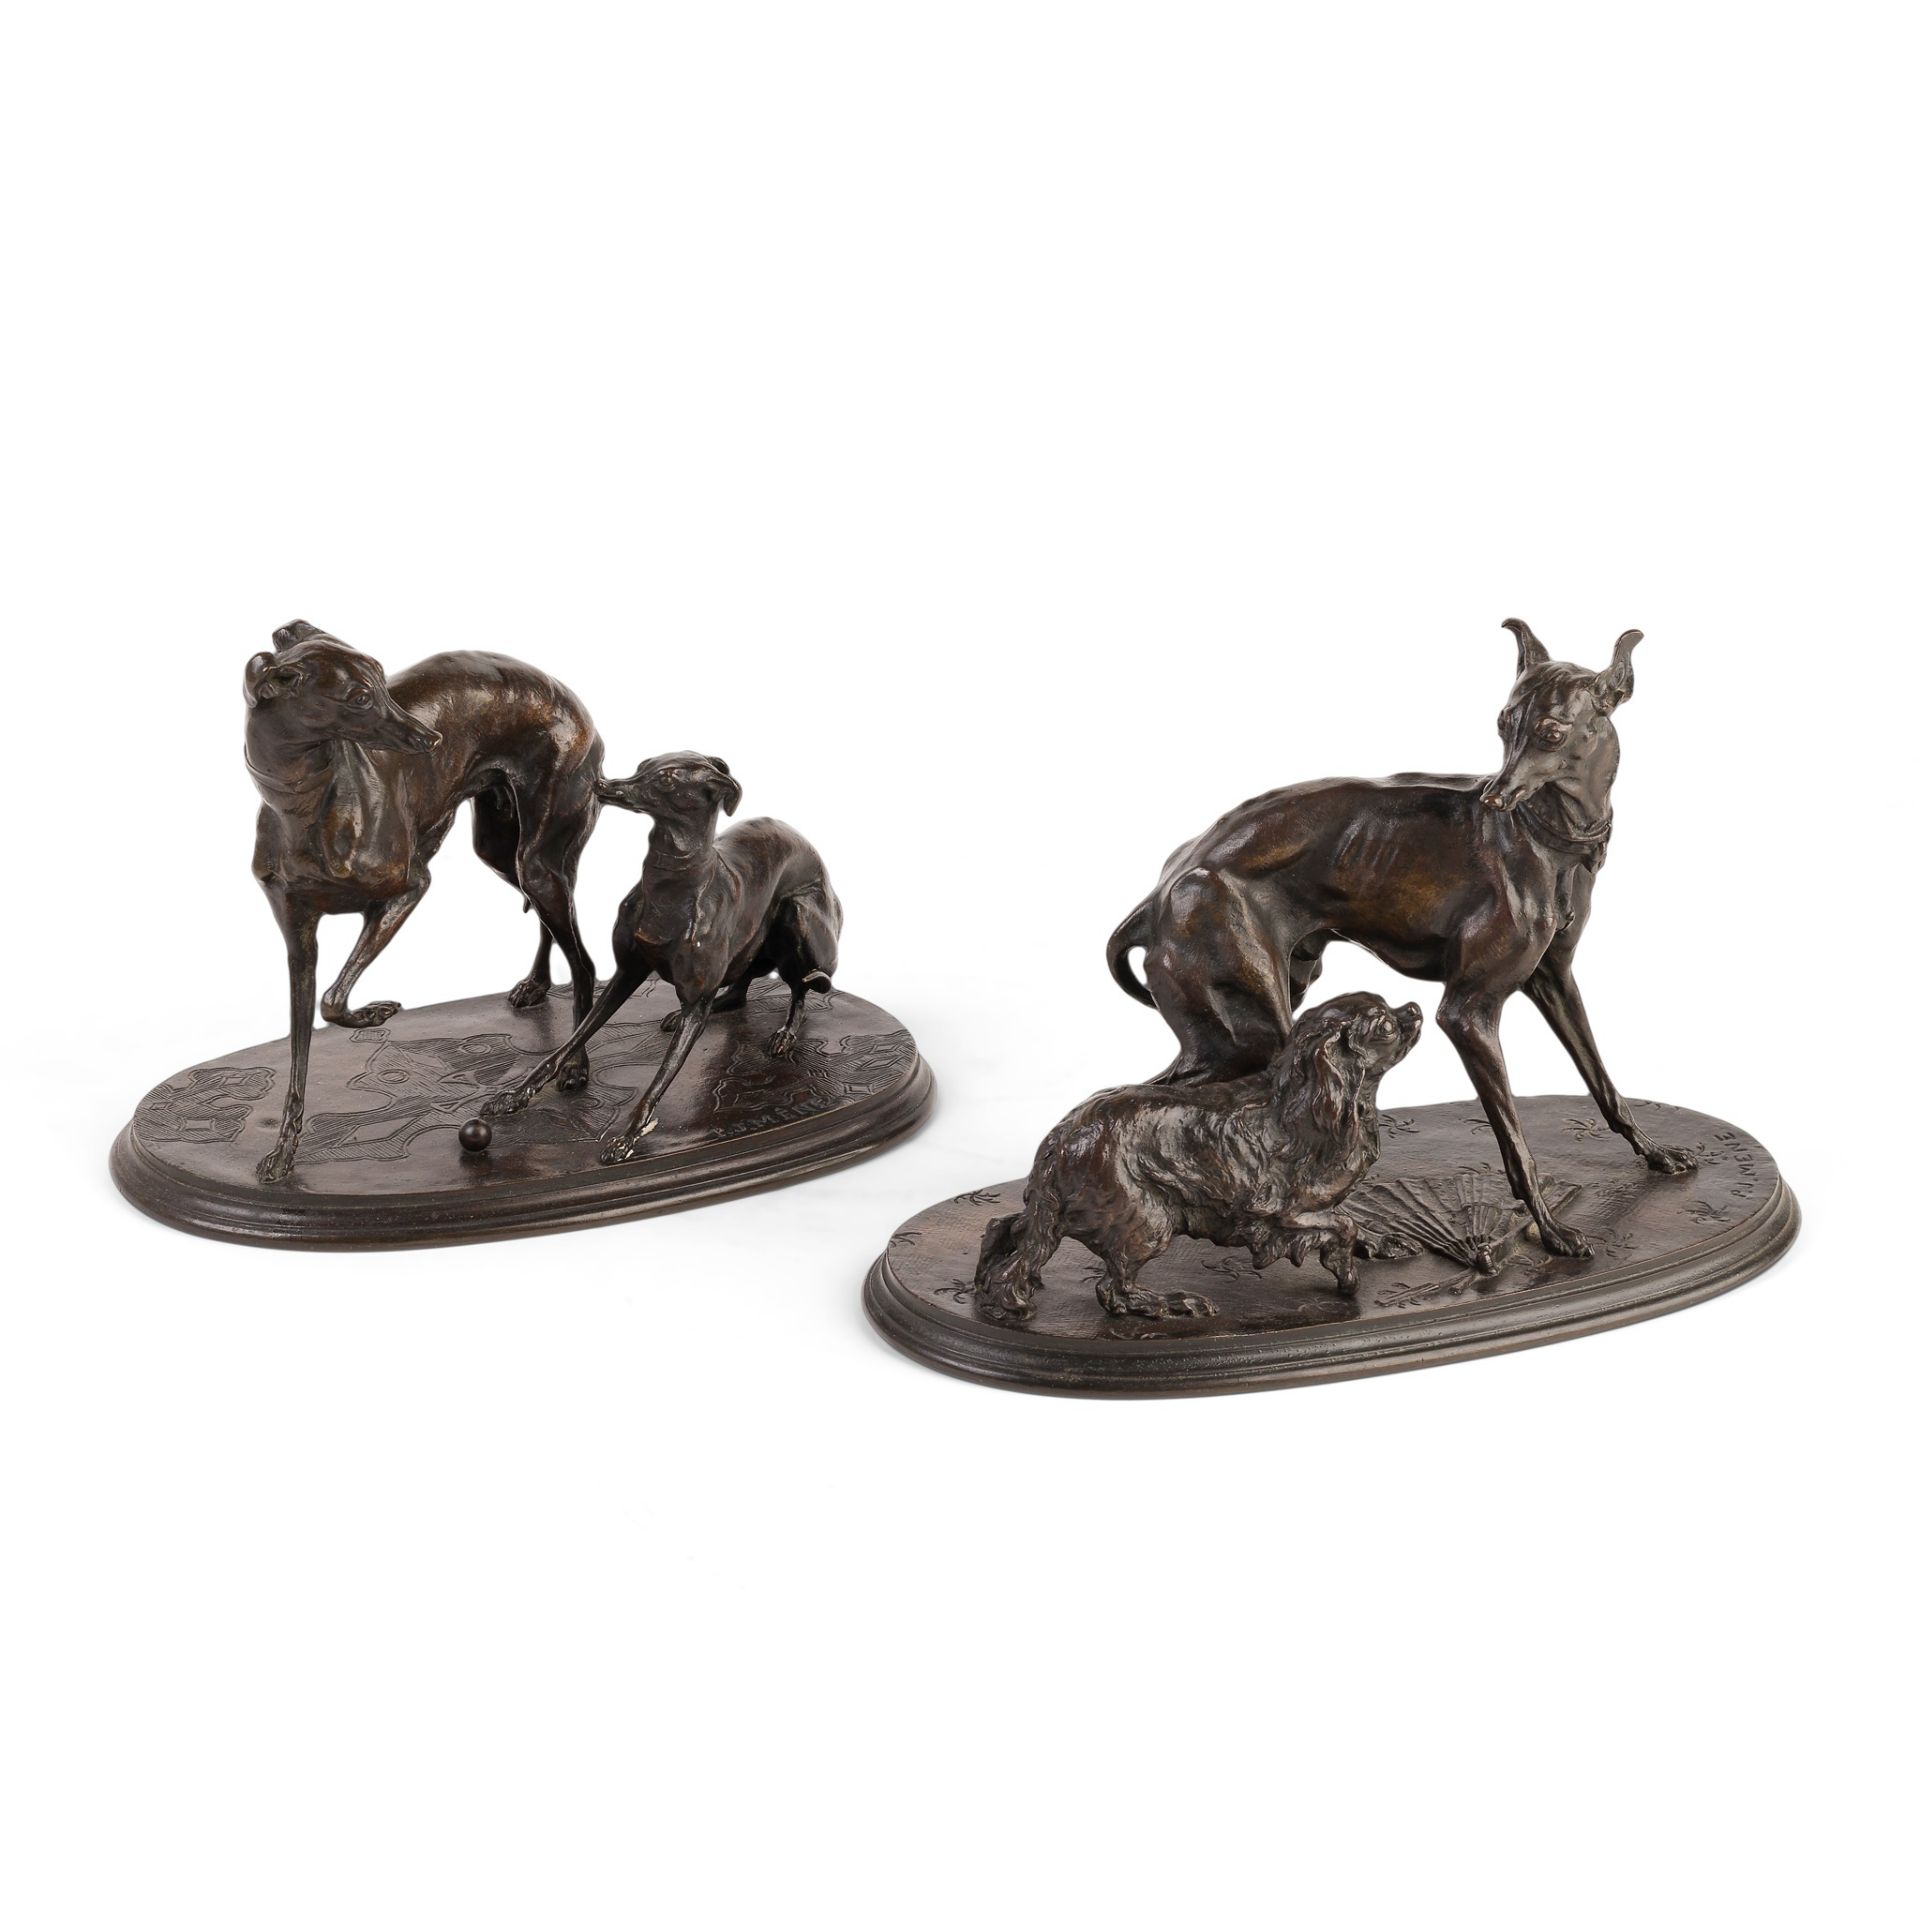 AFTER PIERRE JULES MENE, TWO BRONZE FIGURE GROUPS OF DOGS 19TH CENTURY